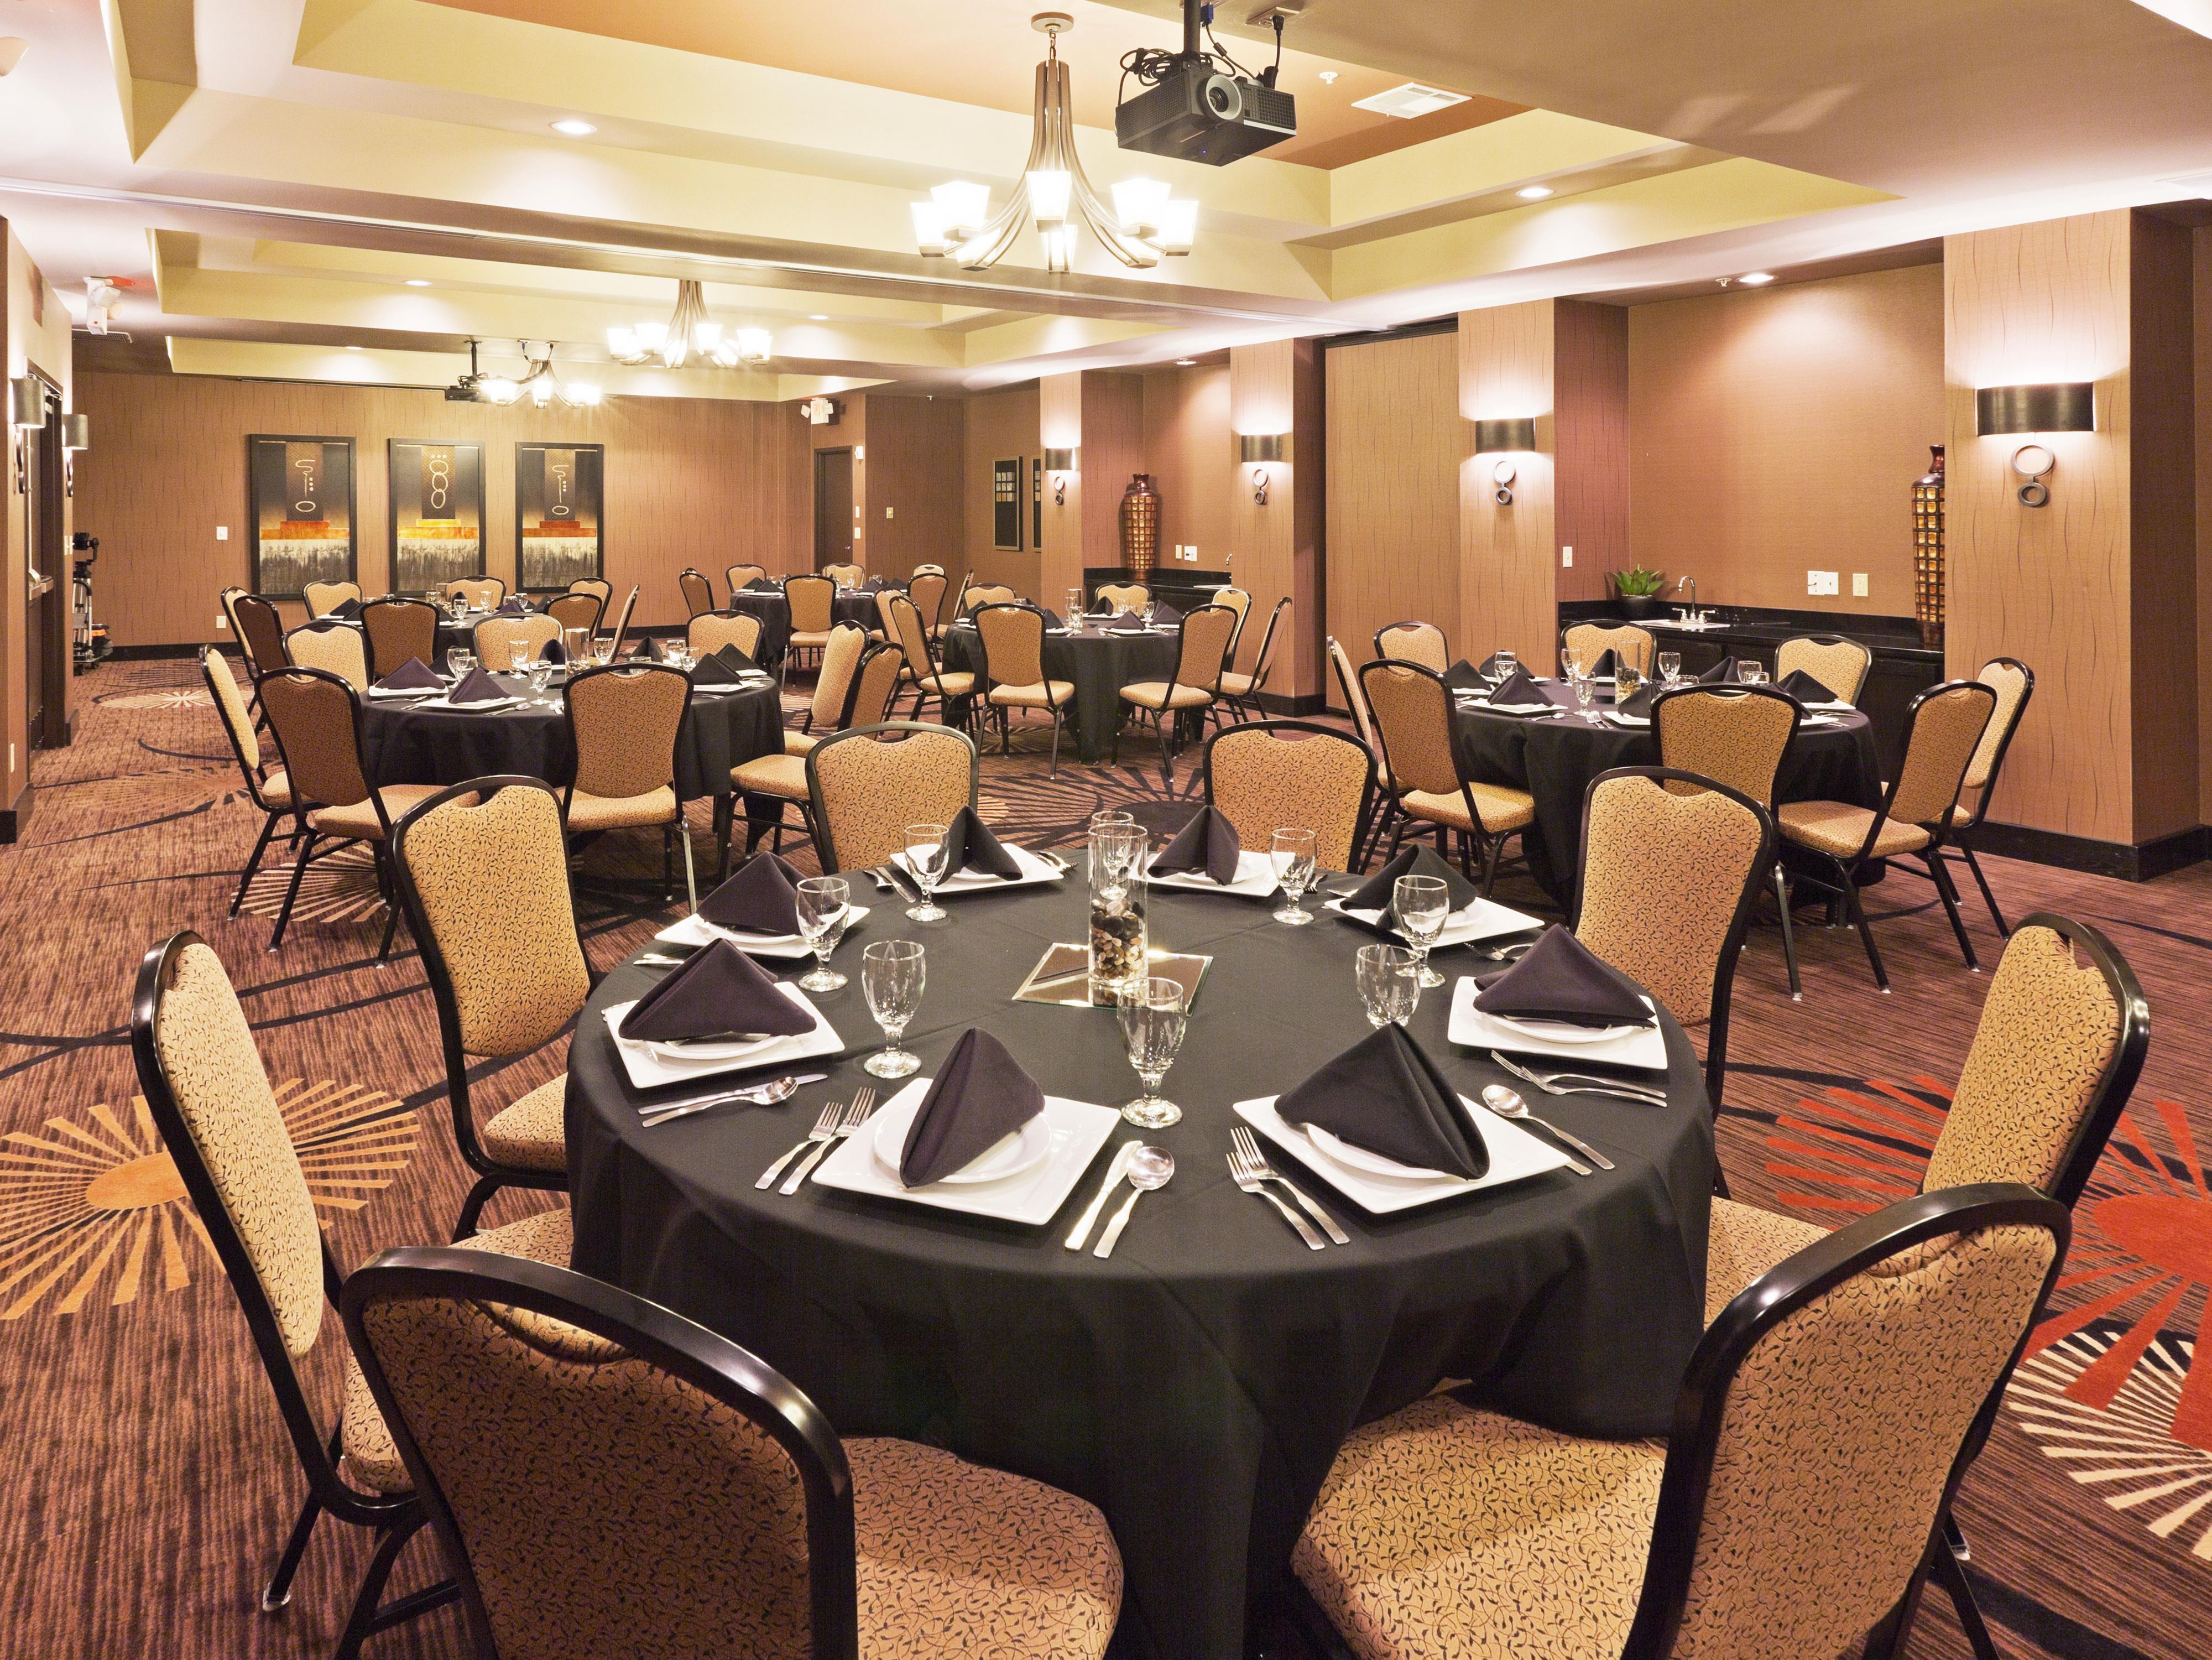 From sports teams to family reunions, we love a good gathering. Let us help with all the details, so you can get ready to play or get ready to celebrate! Our event space is flexible and can also accommodate business meetings or corporate events too.